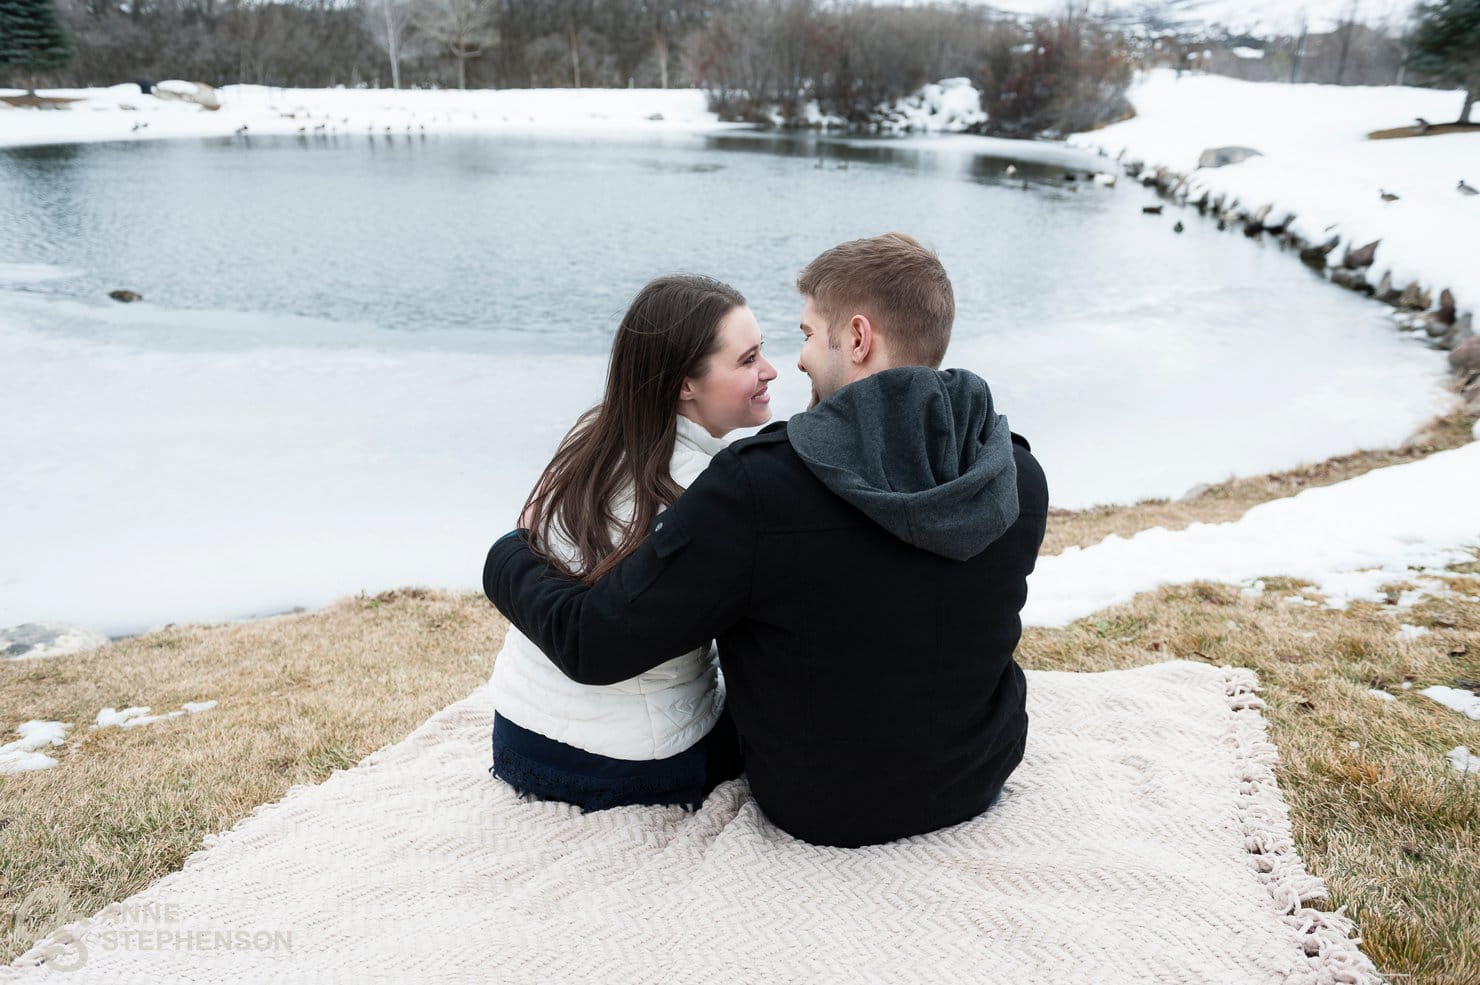 A man puts his arm around his fiance as they sit on a blanket together and watch ducks in a partially frozen pond during their engagement session.